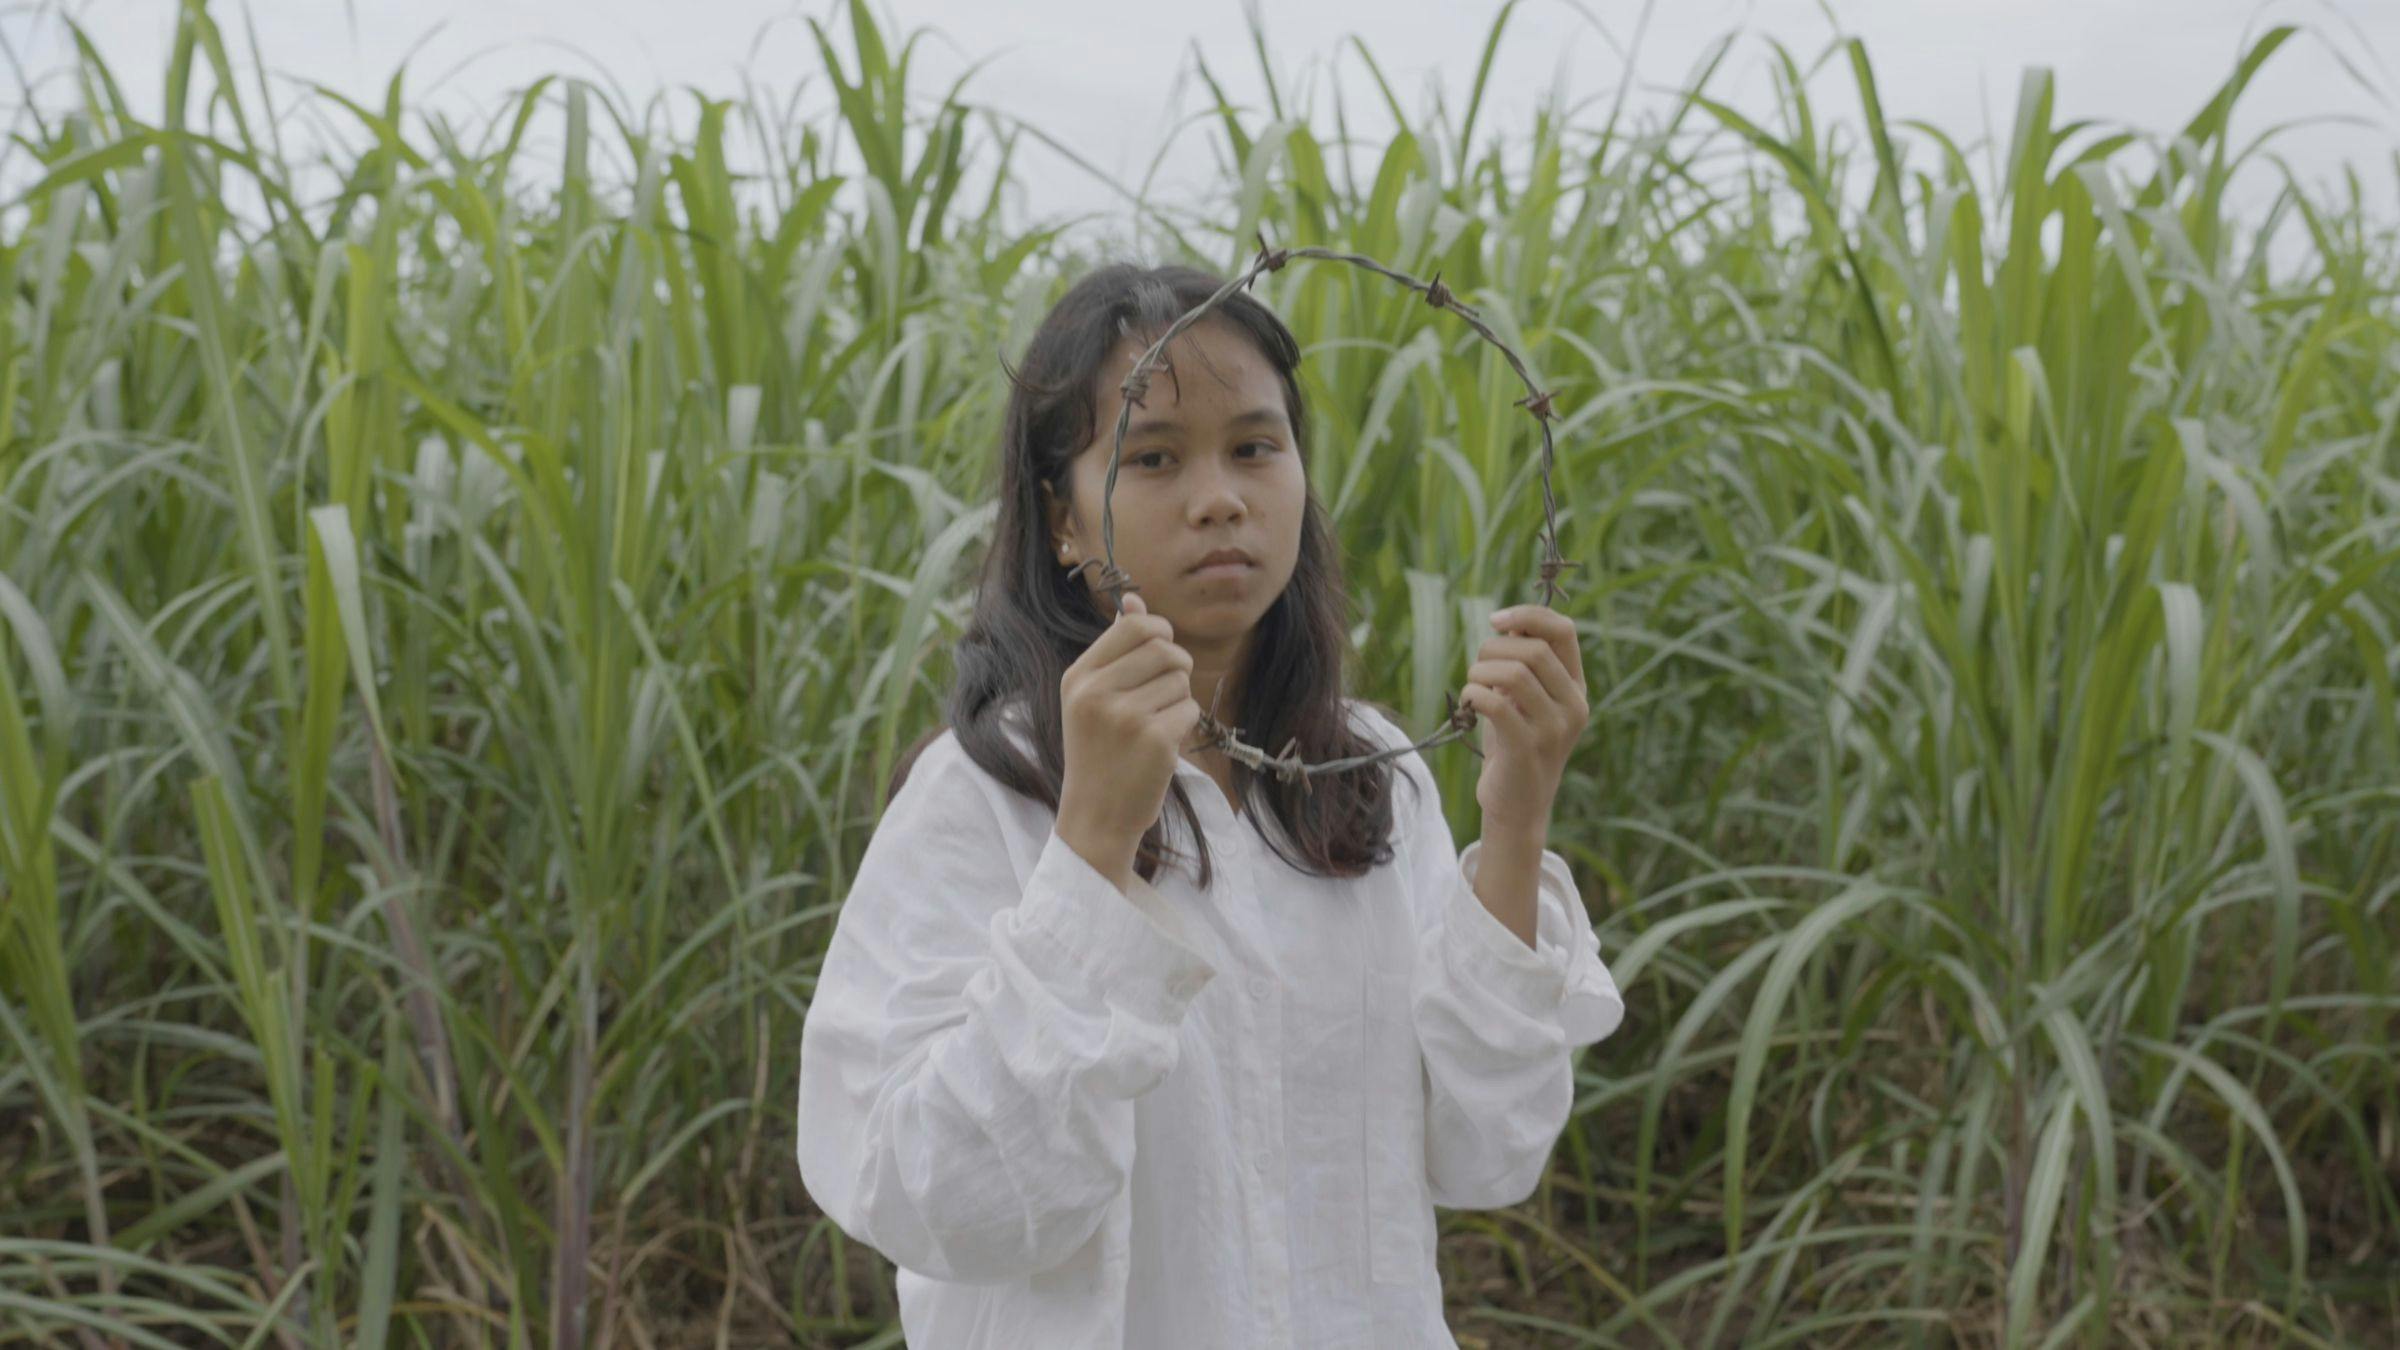 an image of a young person holding a circle of barbwire. She is wearing a white shirt and standing in a field of tall grass